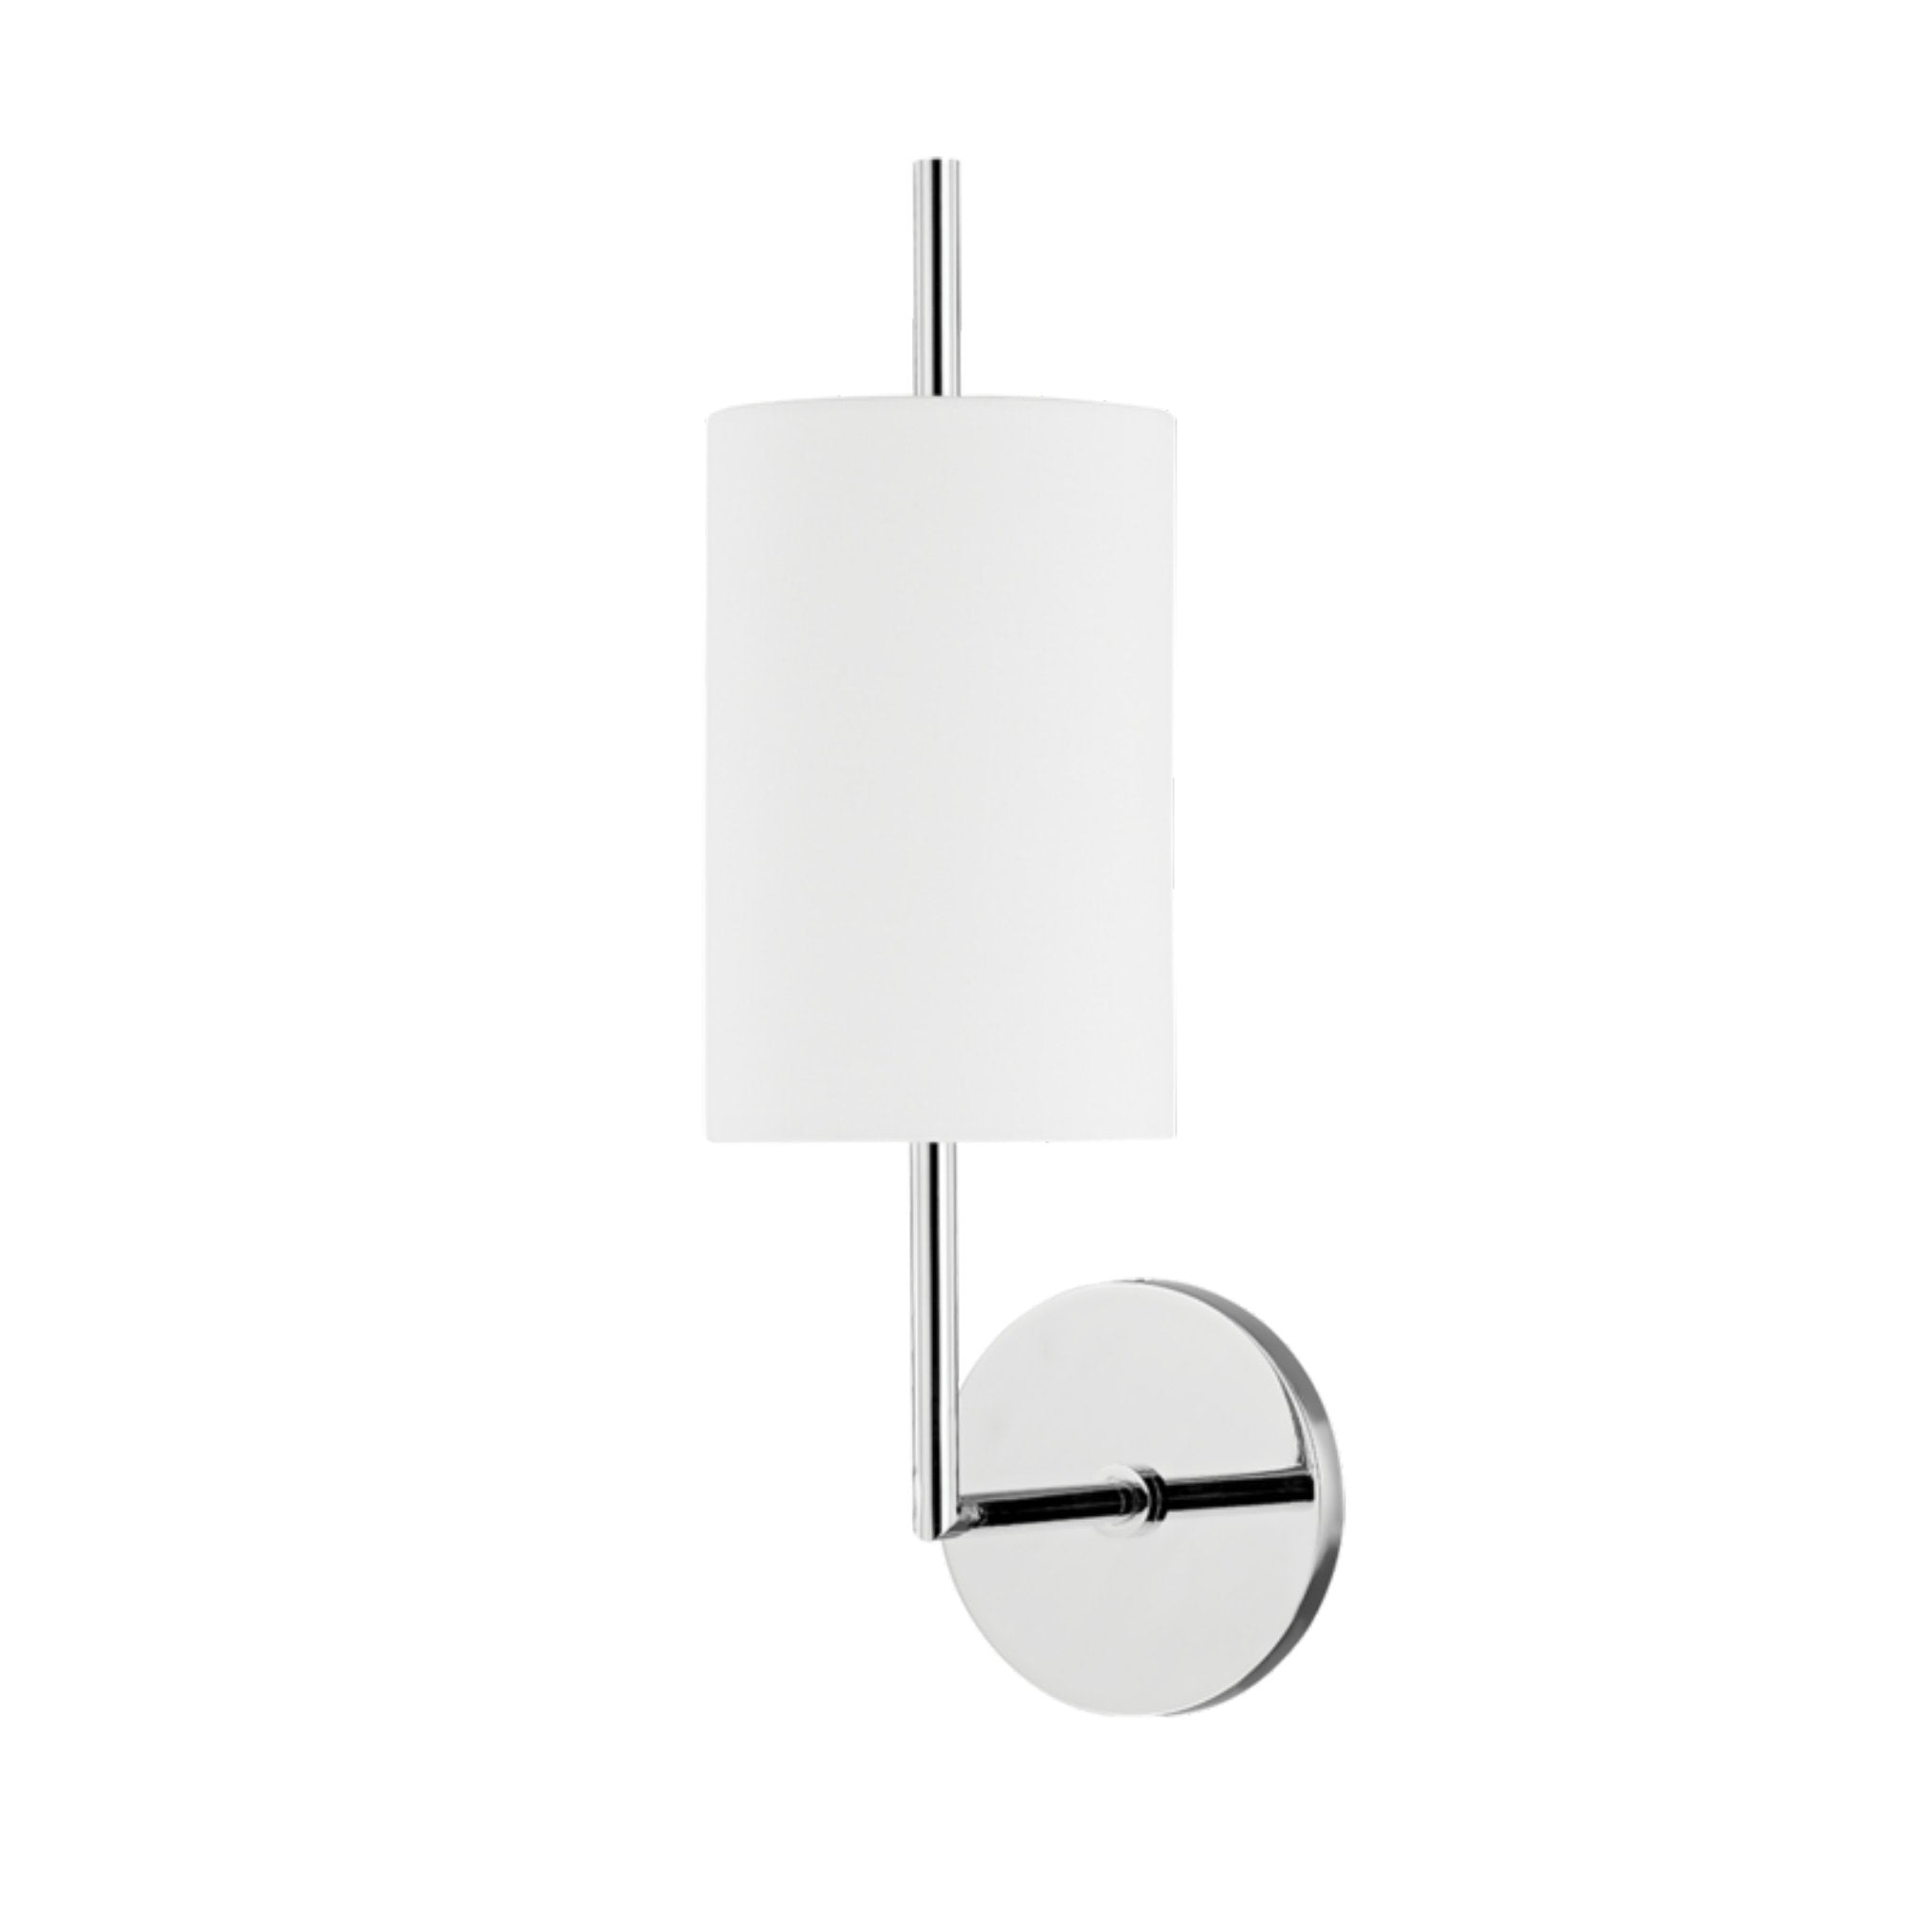 Molly 1 Light Wall Sconce in Polished Nickel